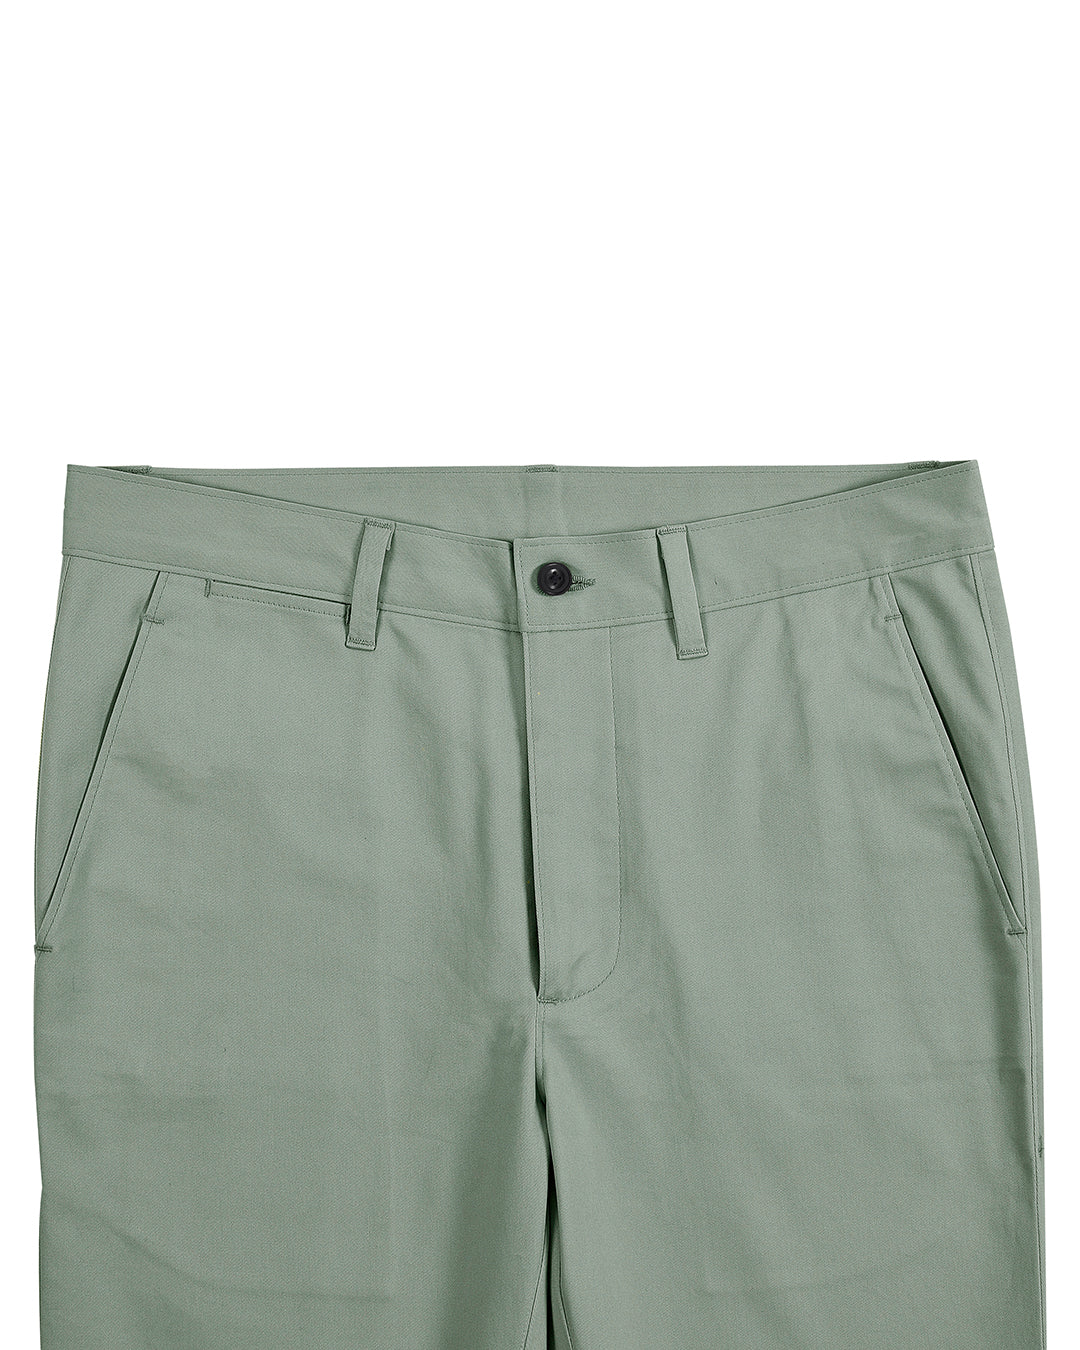 Front view of custom Genoa Chino pants for men by Luxire in pistachio green